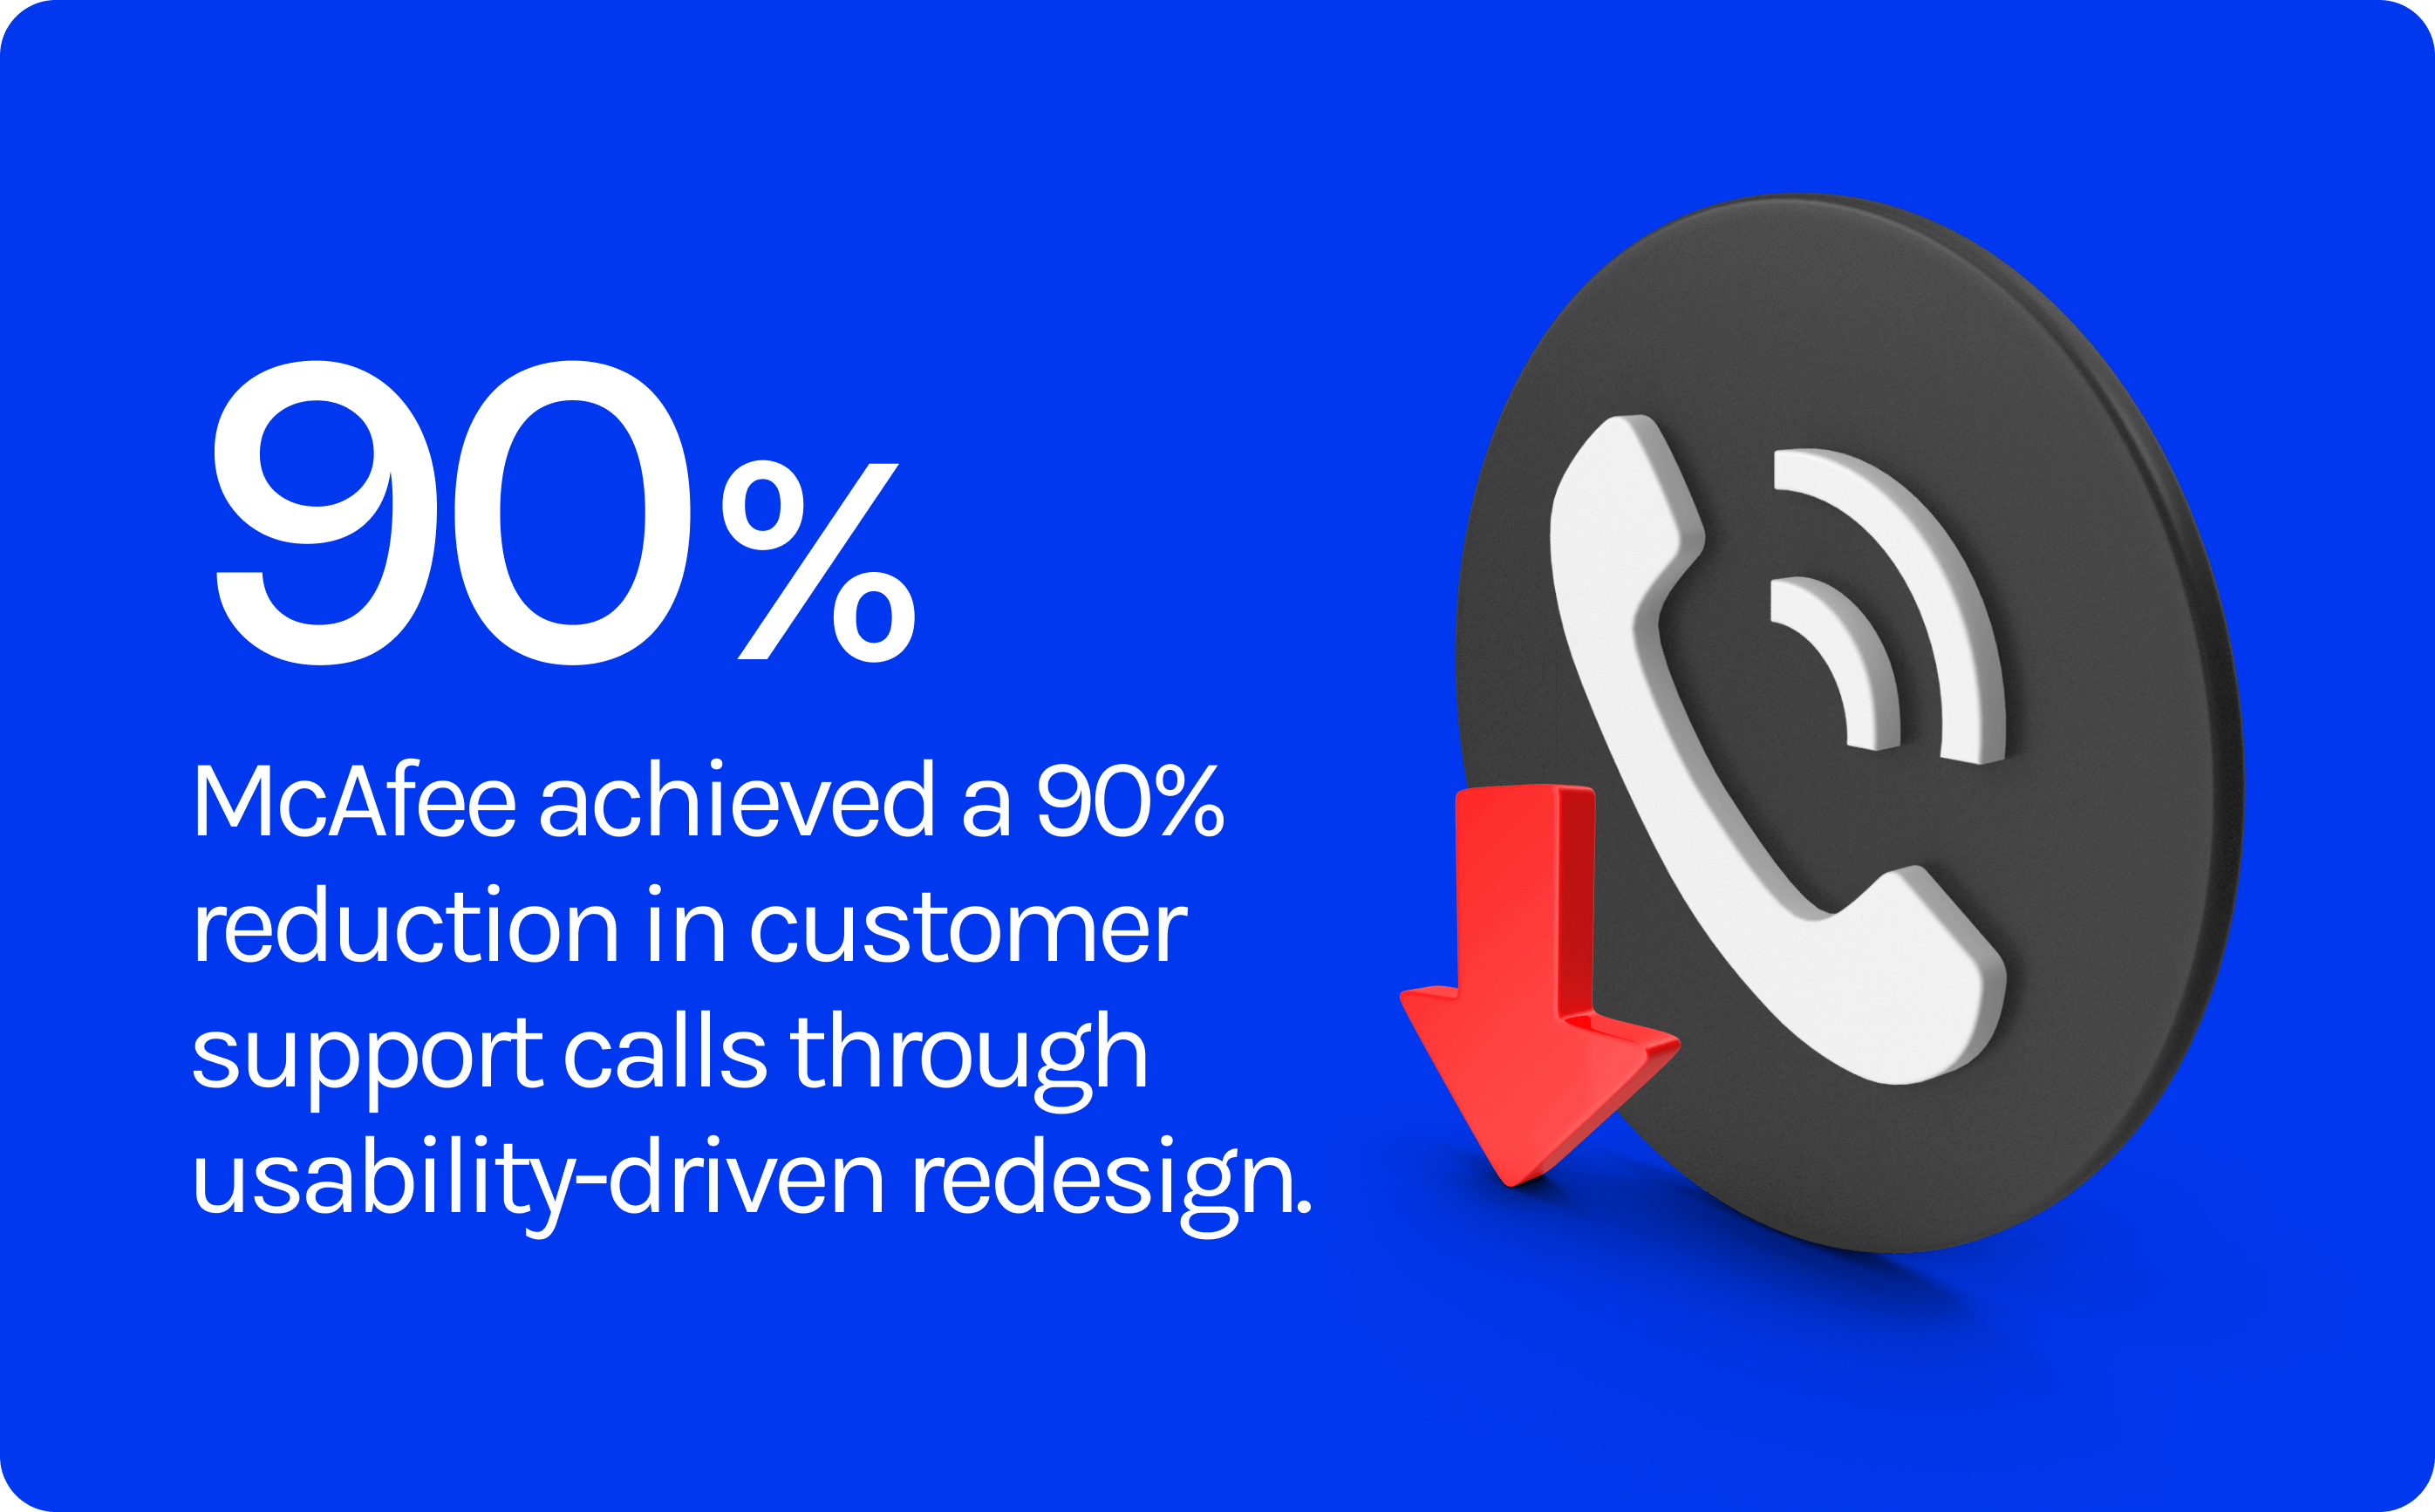 McAfee achieved a 90% reduction in customer support calls through usability-driven redesign.​